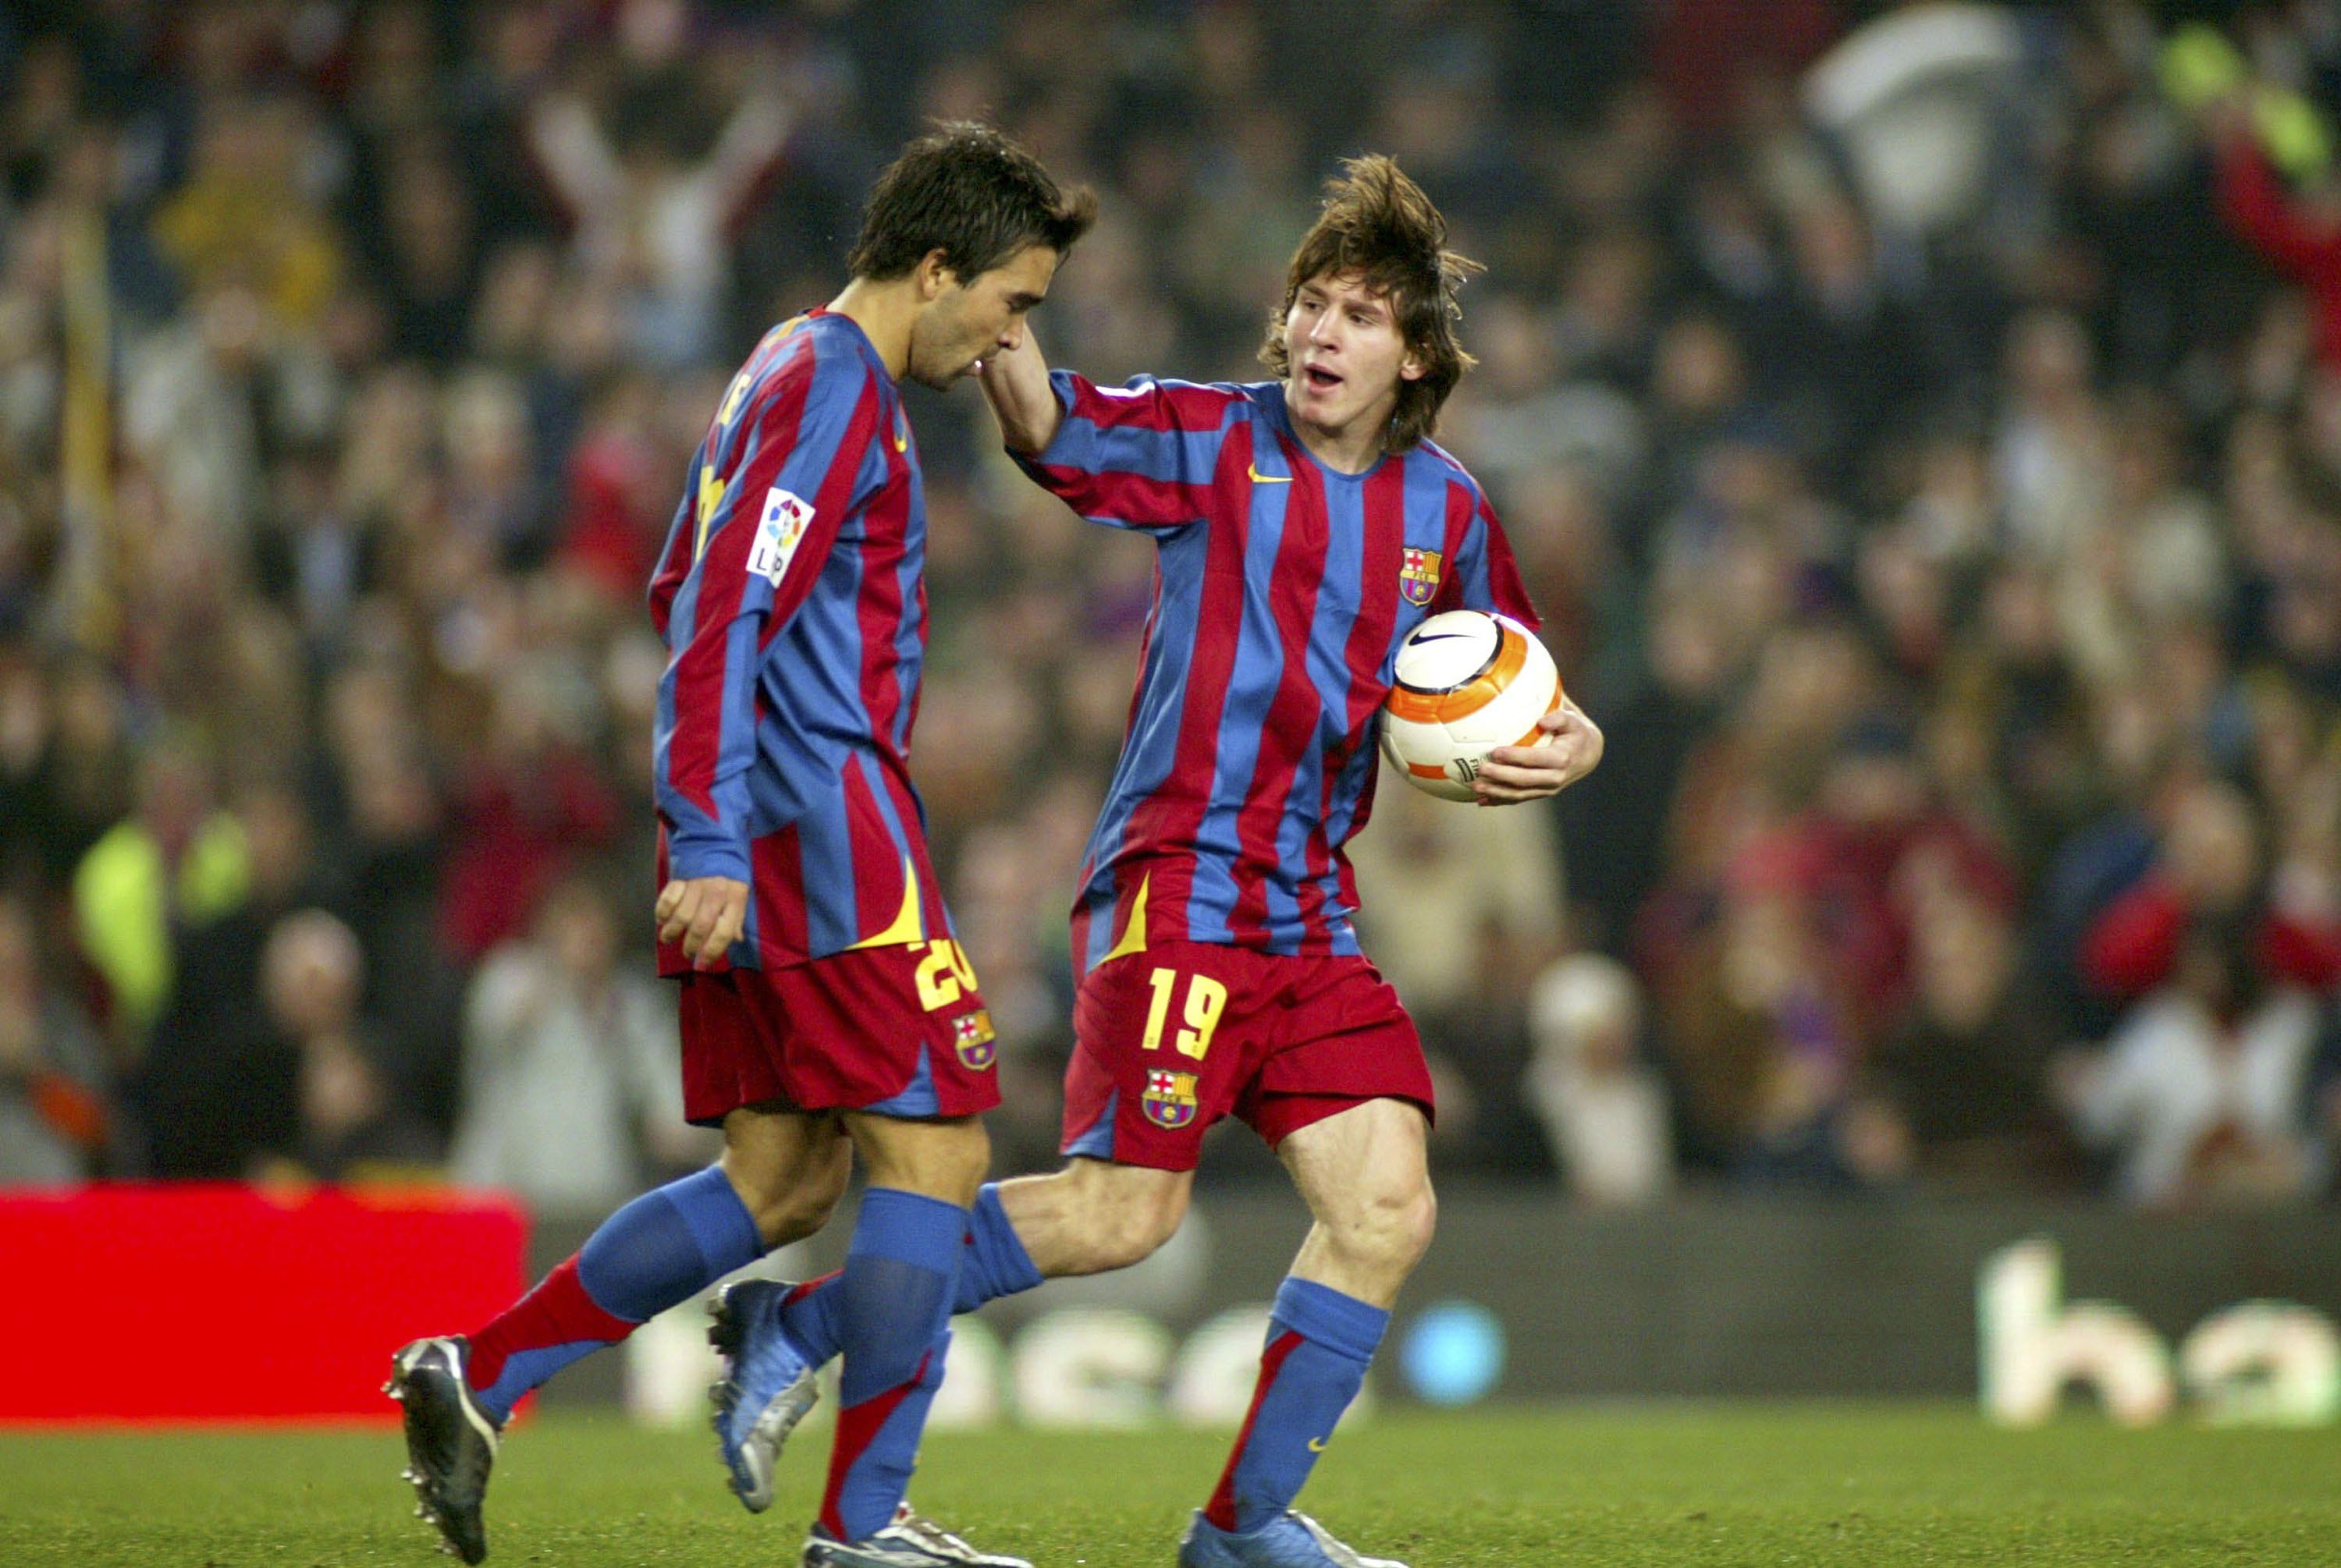 Leo Messi and Deco of Barcelona after Messi's goal 